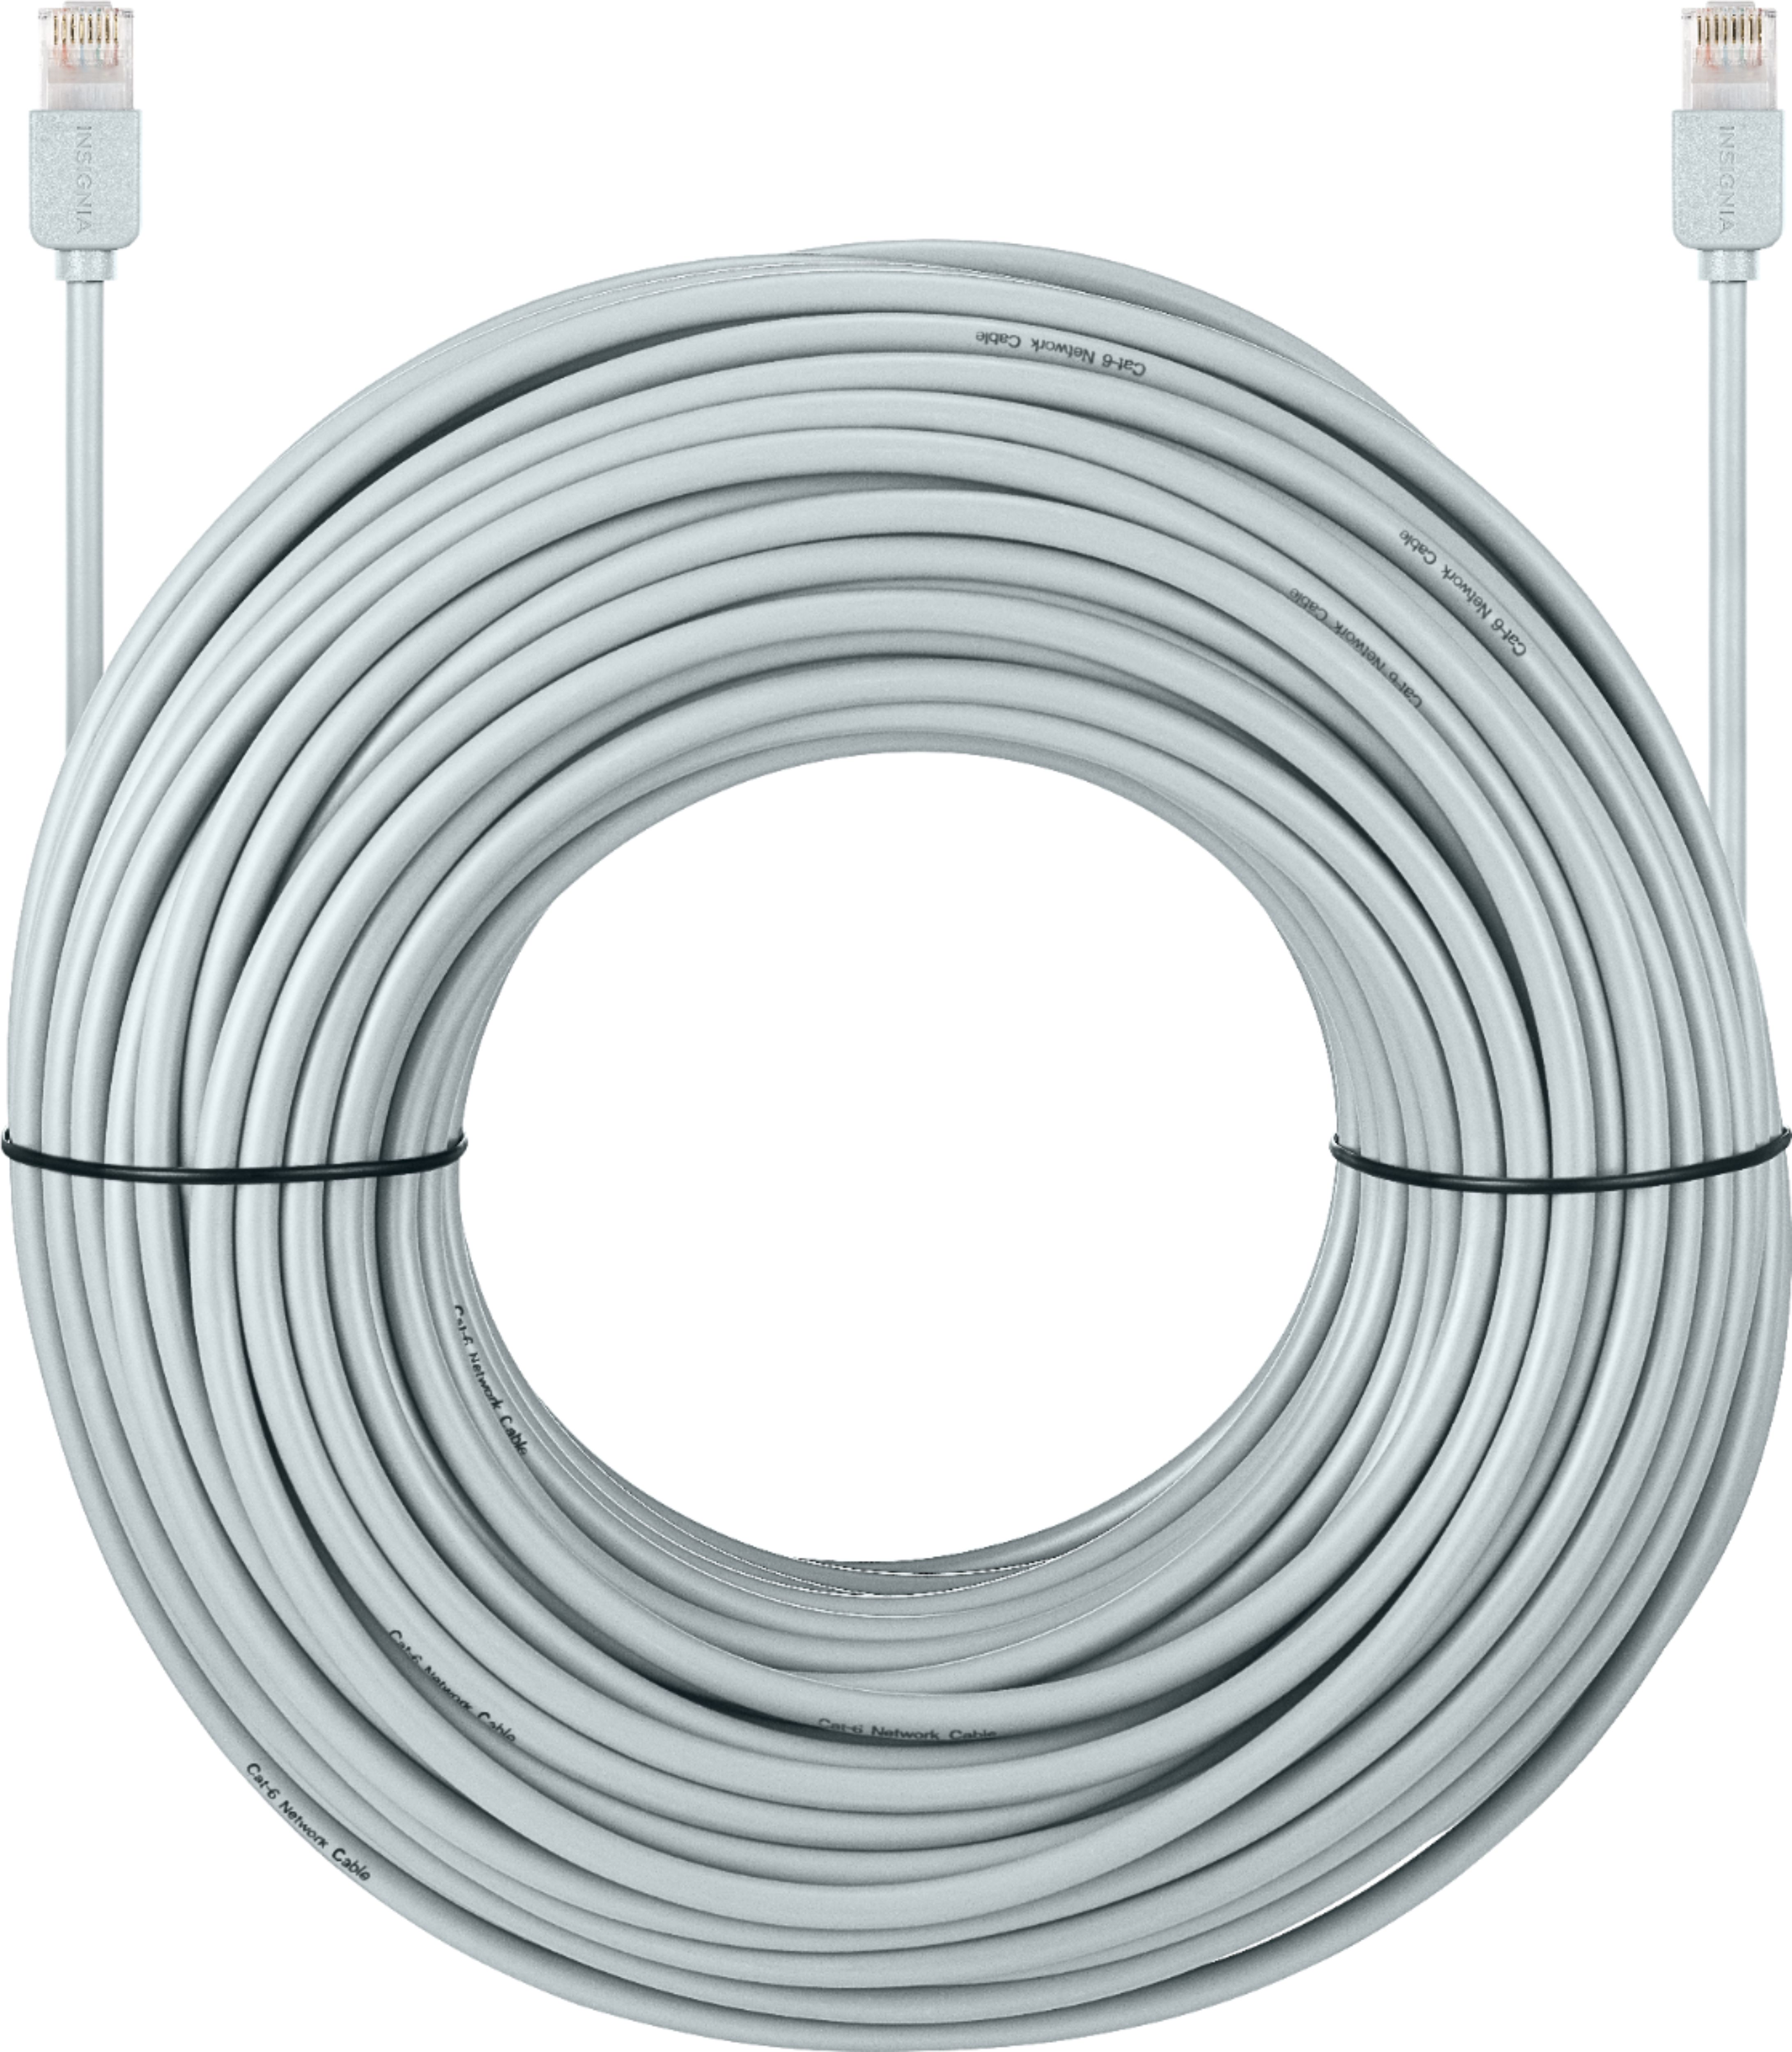 Insignia - 150' Cat-6 Network Cable - Gray